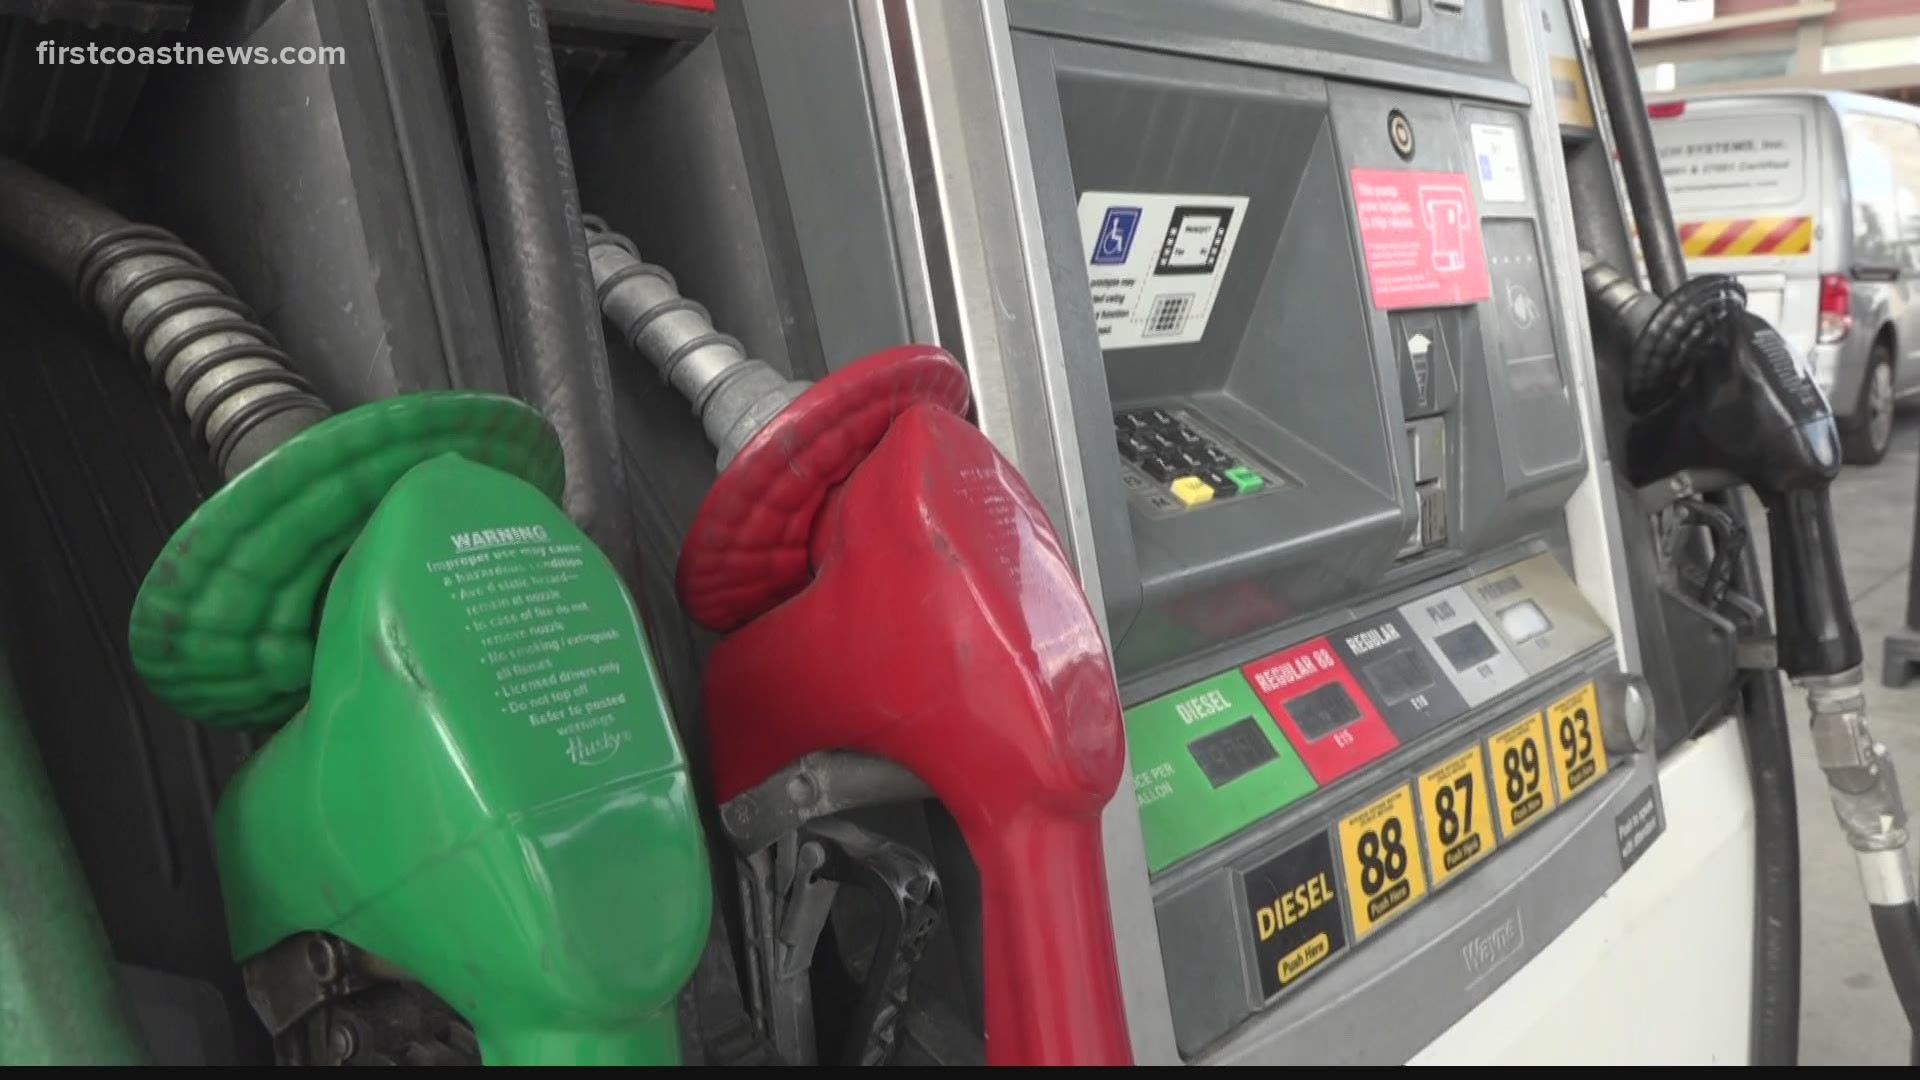 You can save when you get gas by using these tips and tricks.